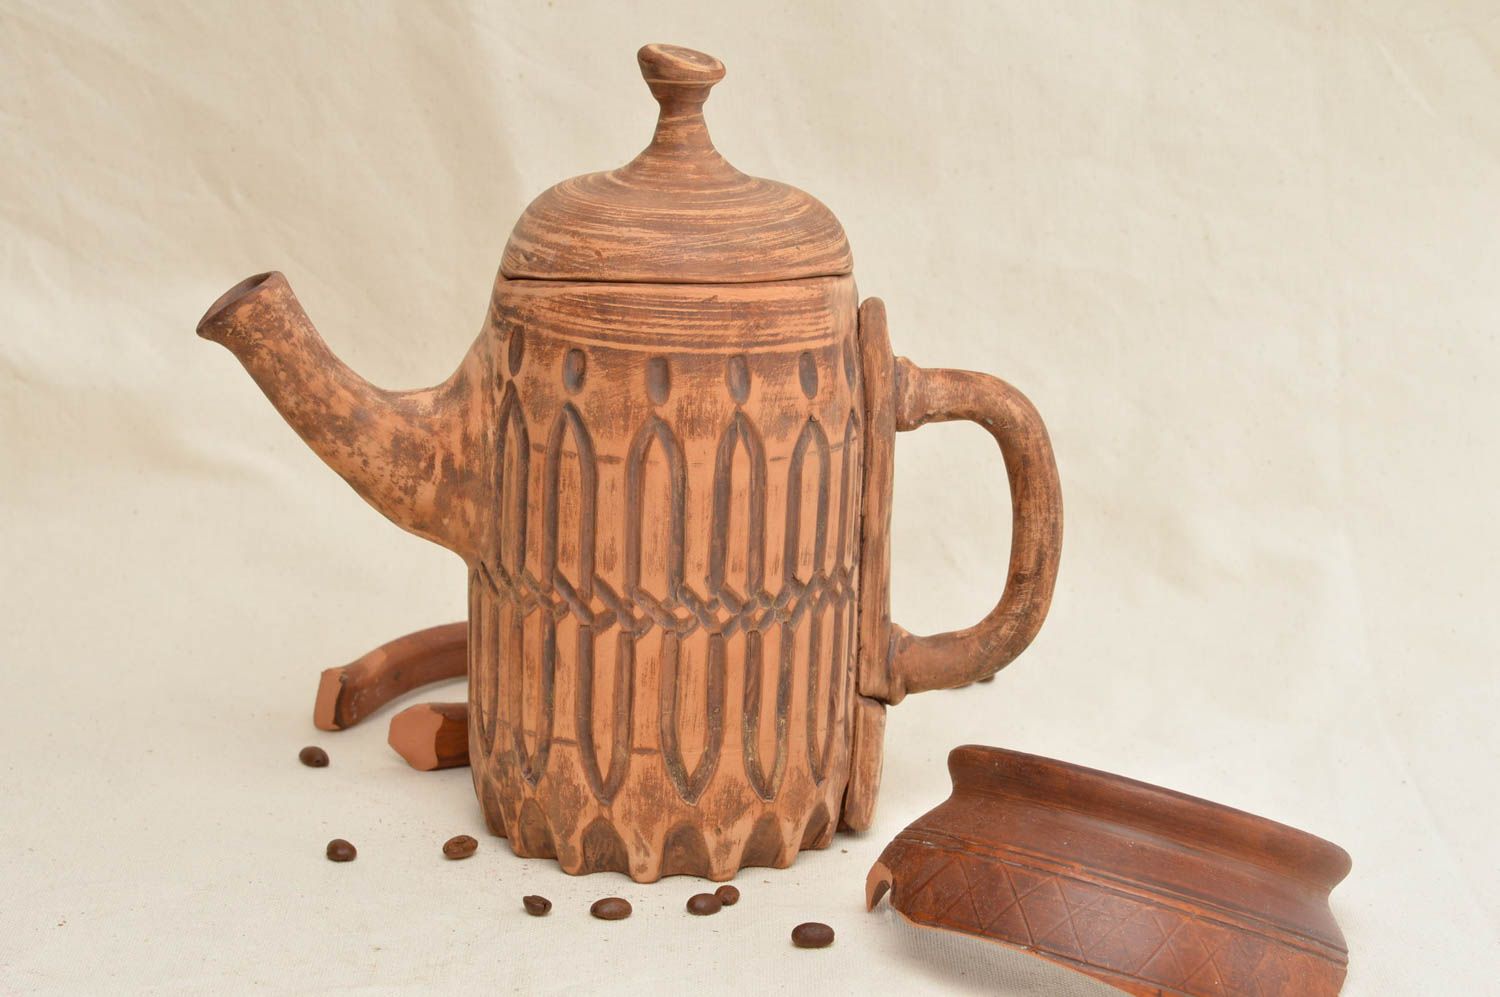 Handmade ceramic teapot with lid ornamented clay teapot table setting gift ideas photo 1